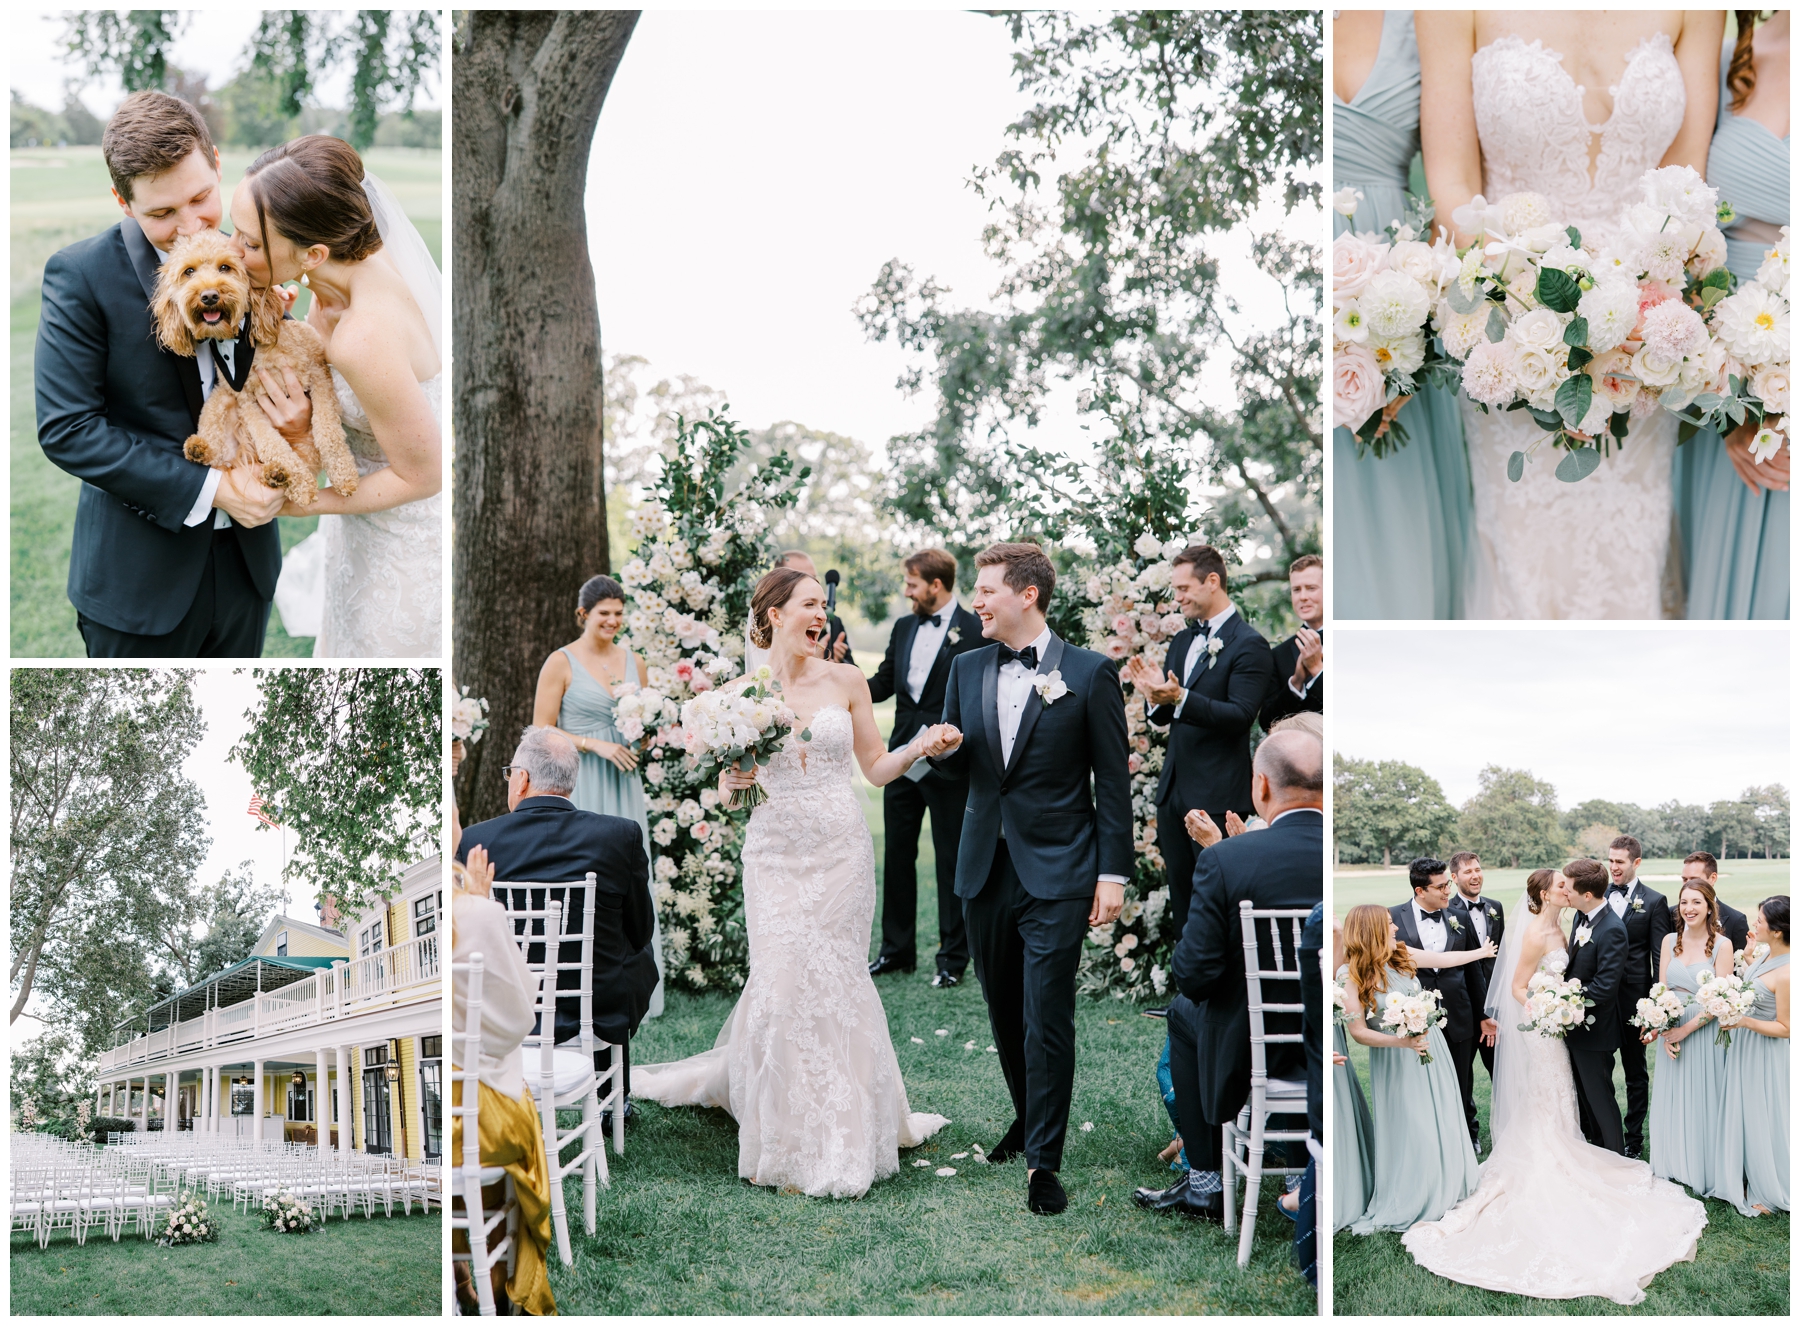 Romantic floral centered wedding at The Country Club in Brookline, MA